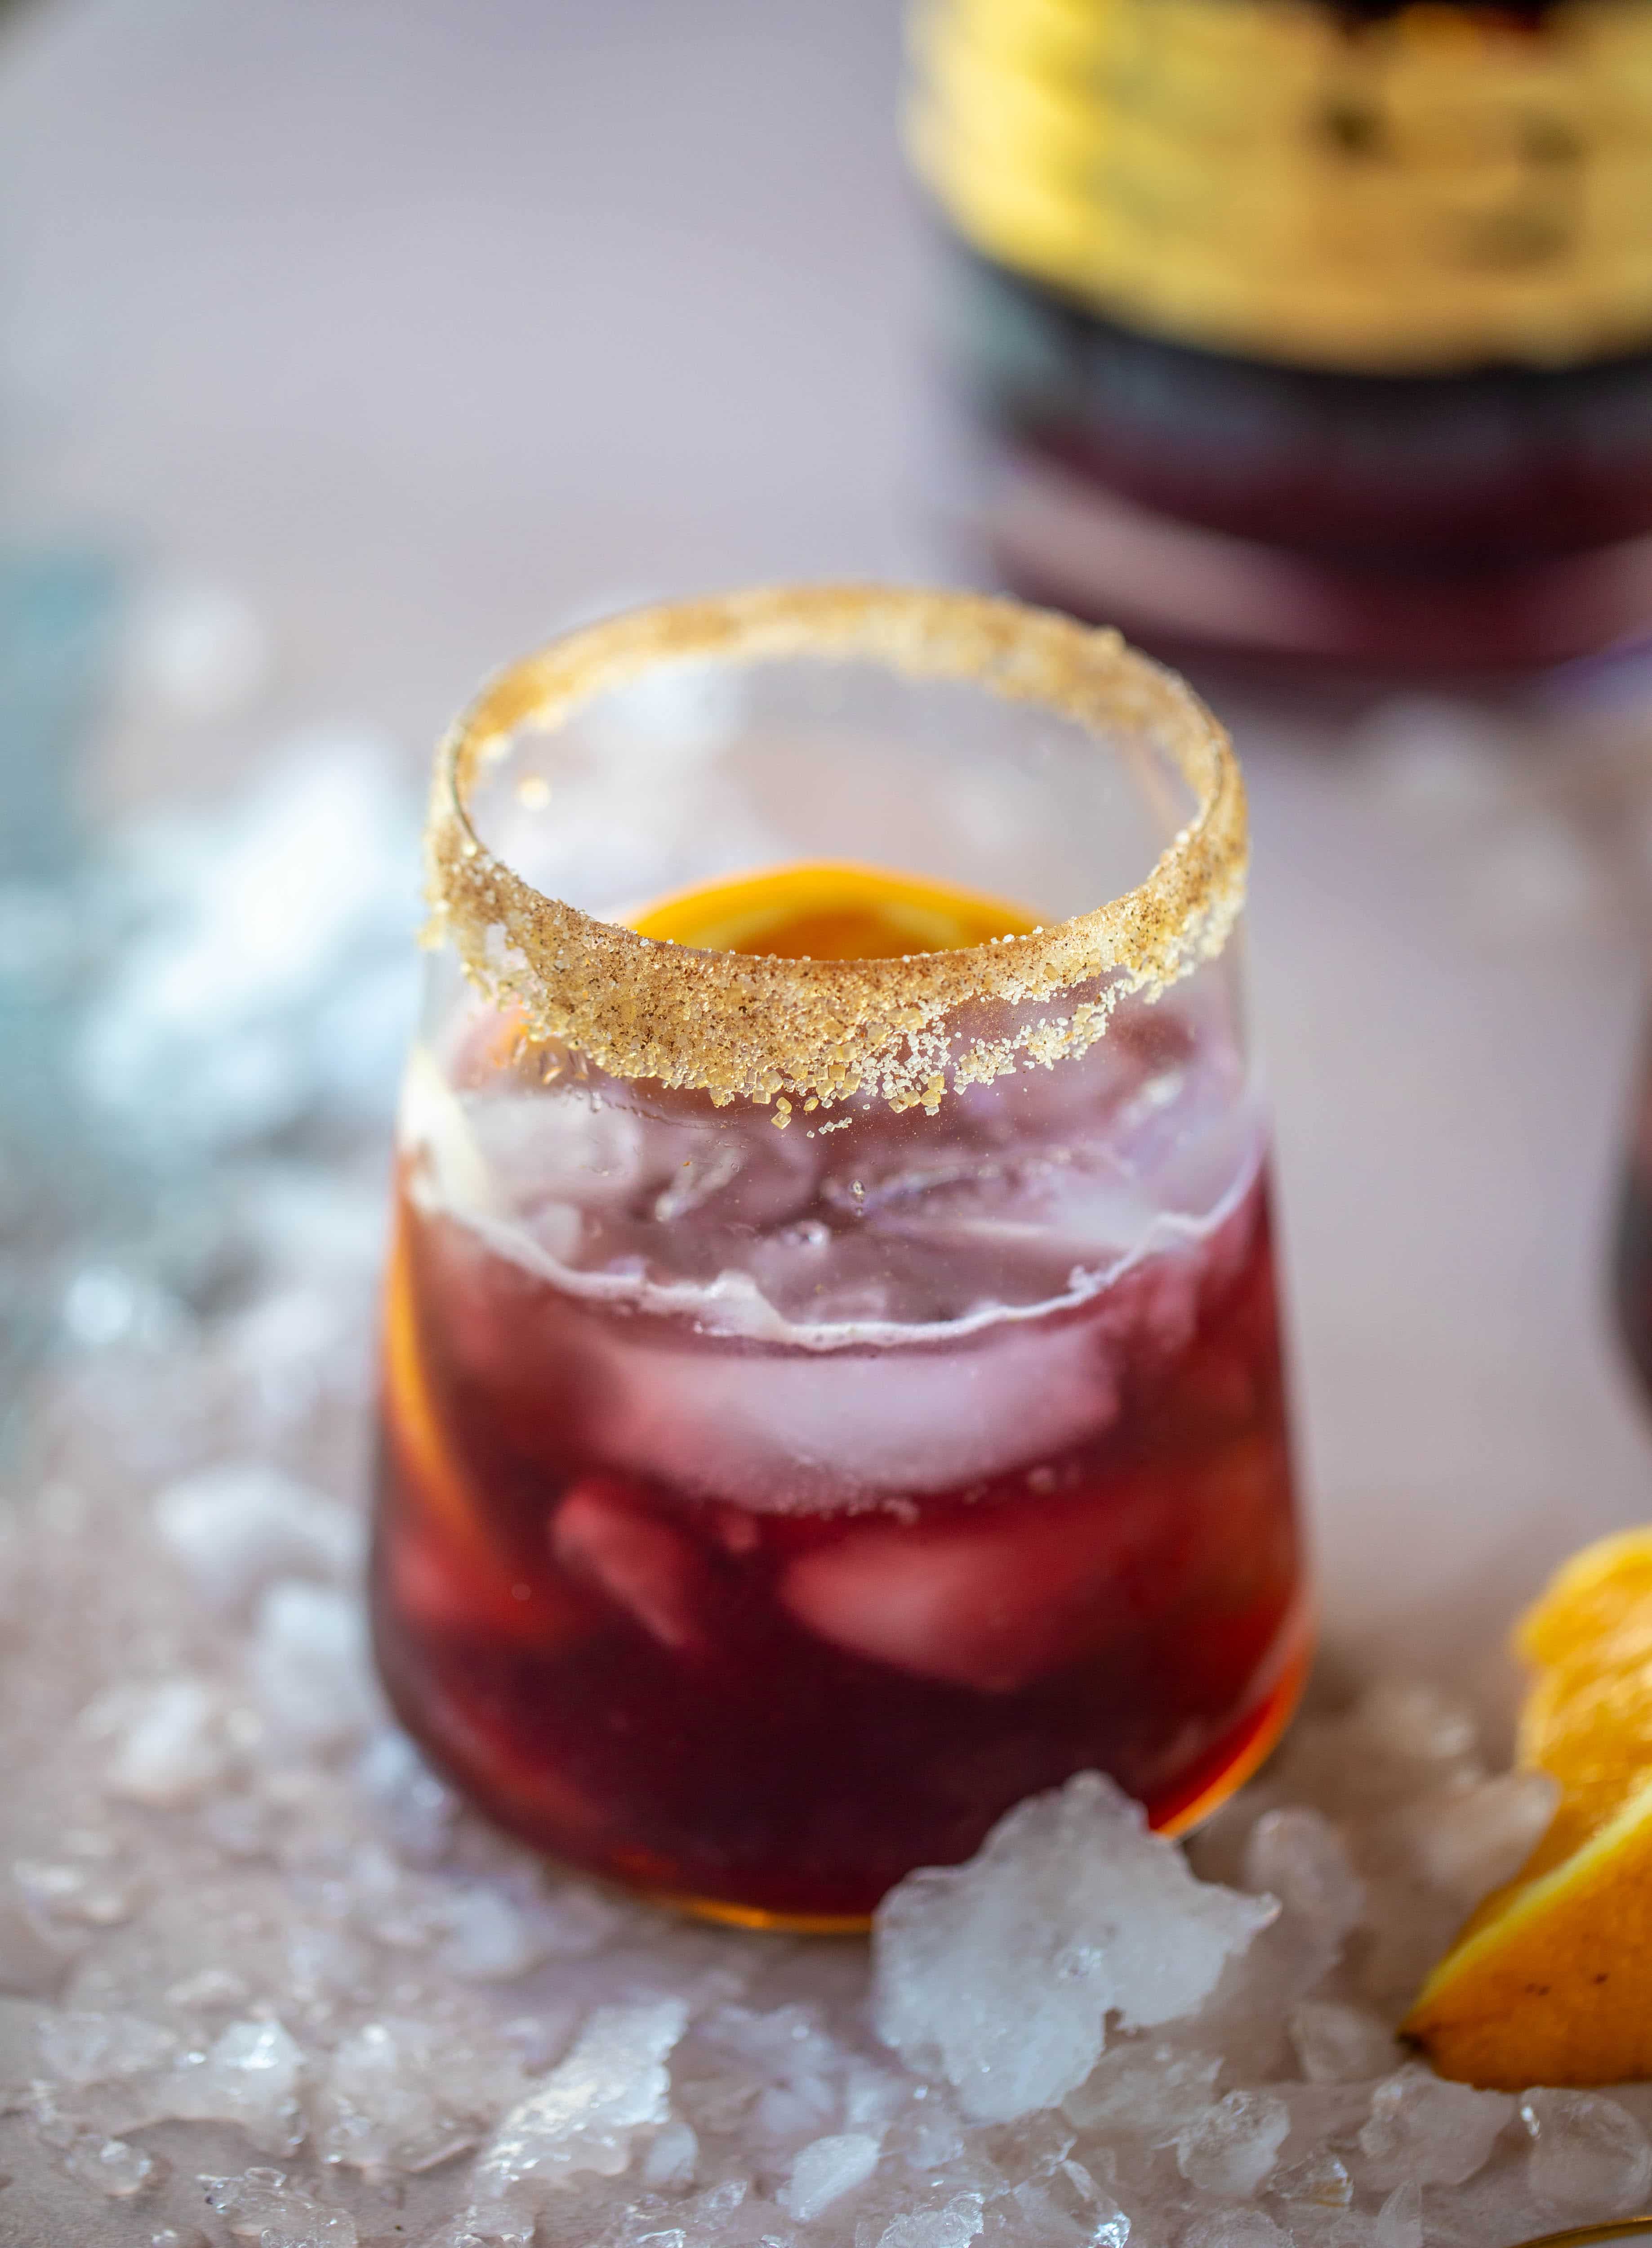 A refreshing and warming lambrusco smash, made with bubbly red wine, bourbon, orange soda and maple syrup. Tastes like the holidays!